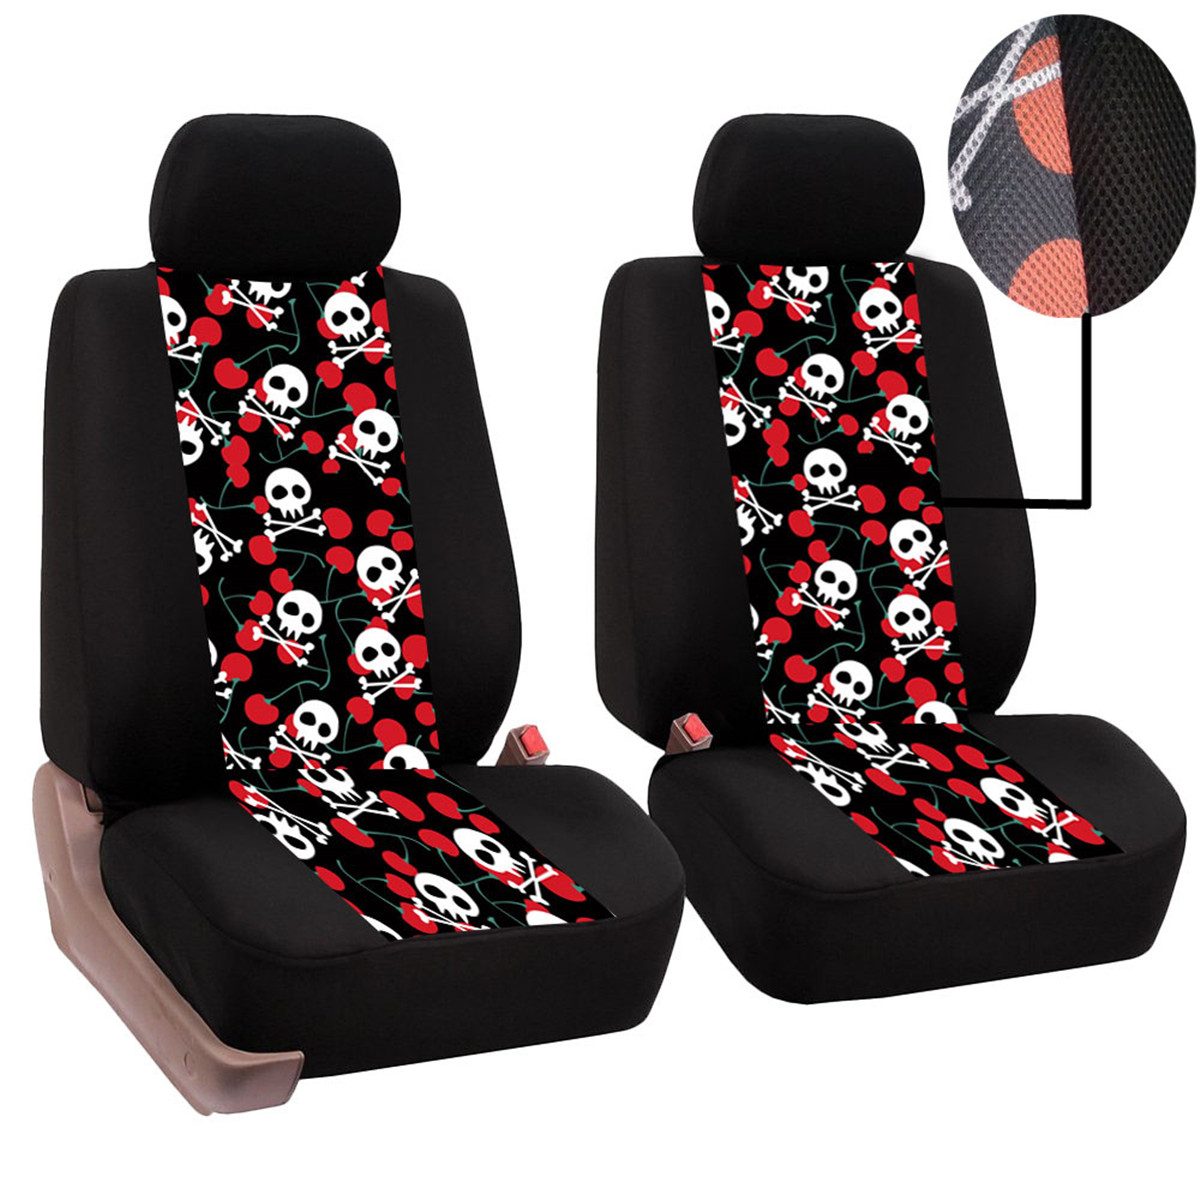 

Universal Auto Car Seat Cover Front Back Seat Protectors Full Set Cover Skull Style For Cars Trucks SUV